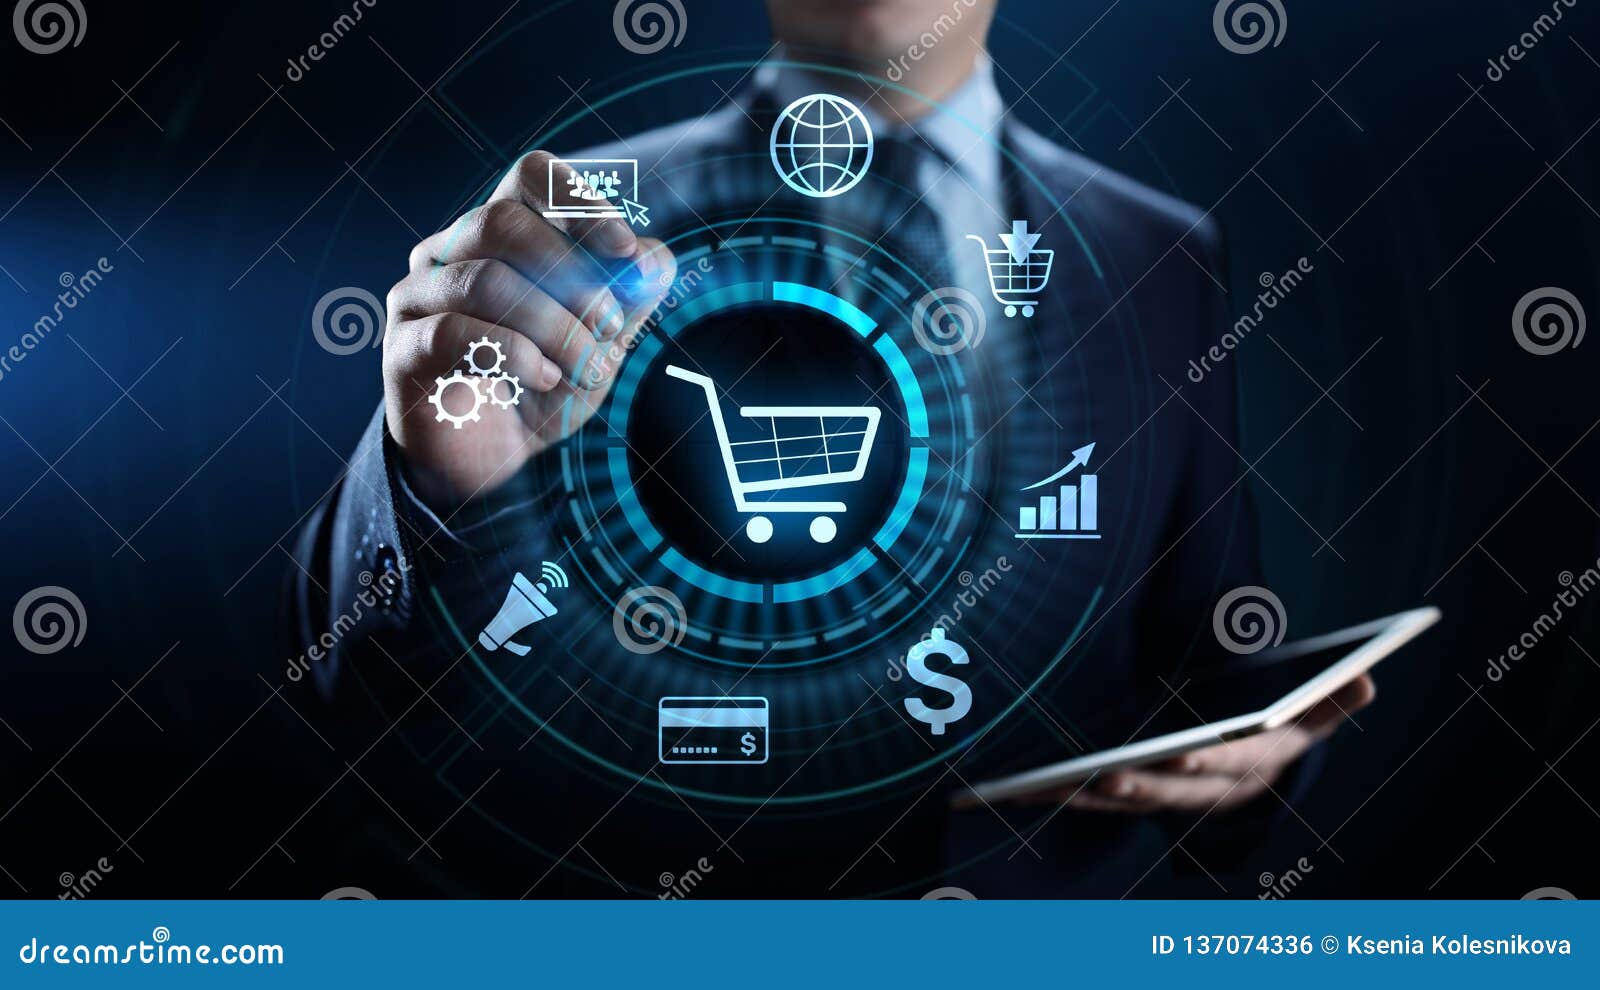 e-commerce online shopping digital marketing and sales business technology concept.